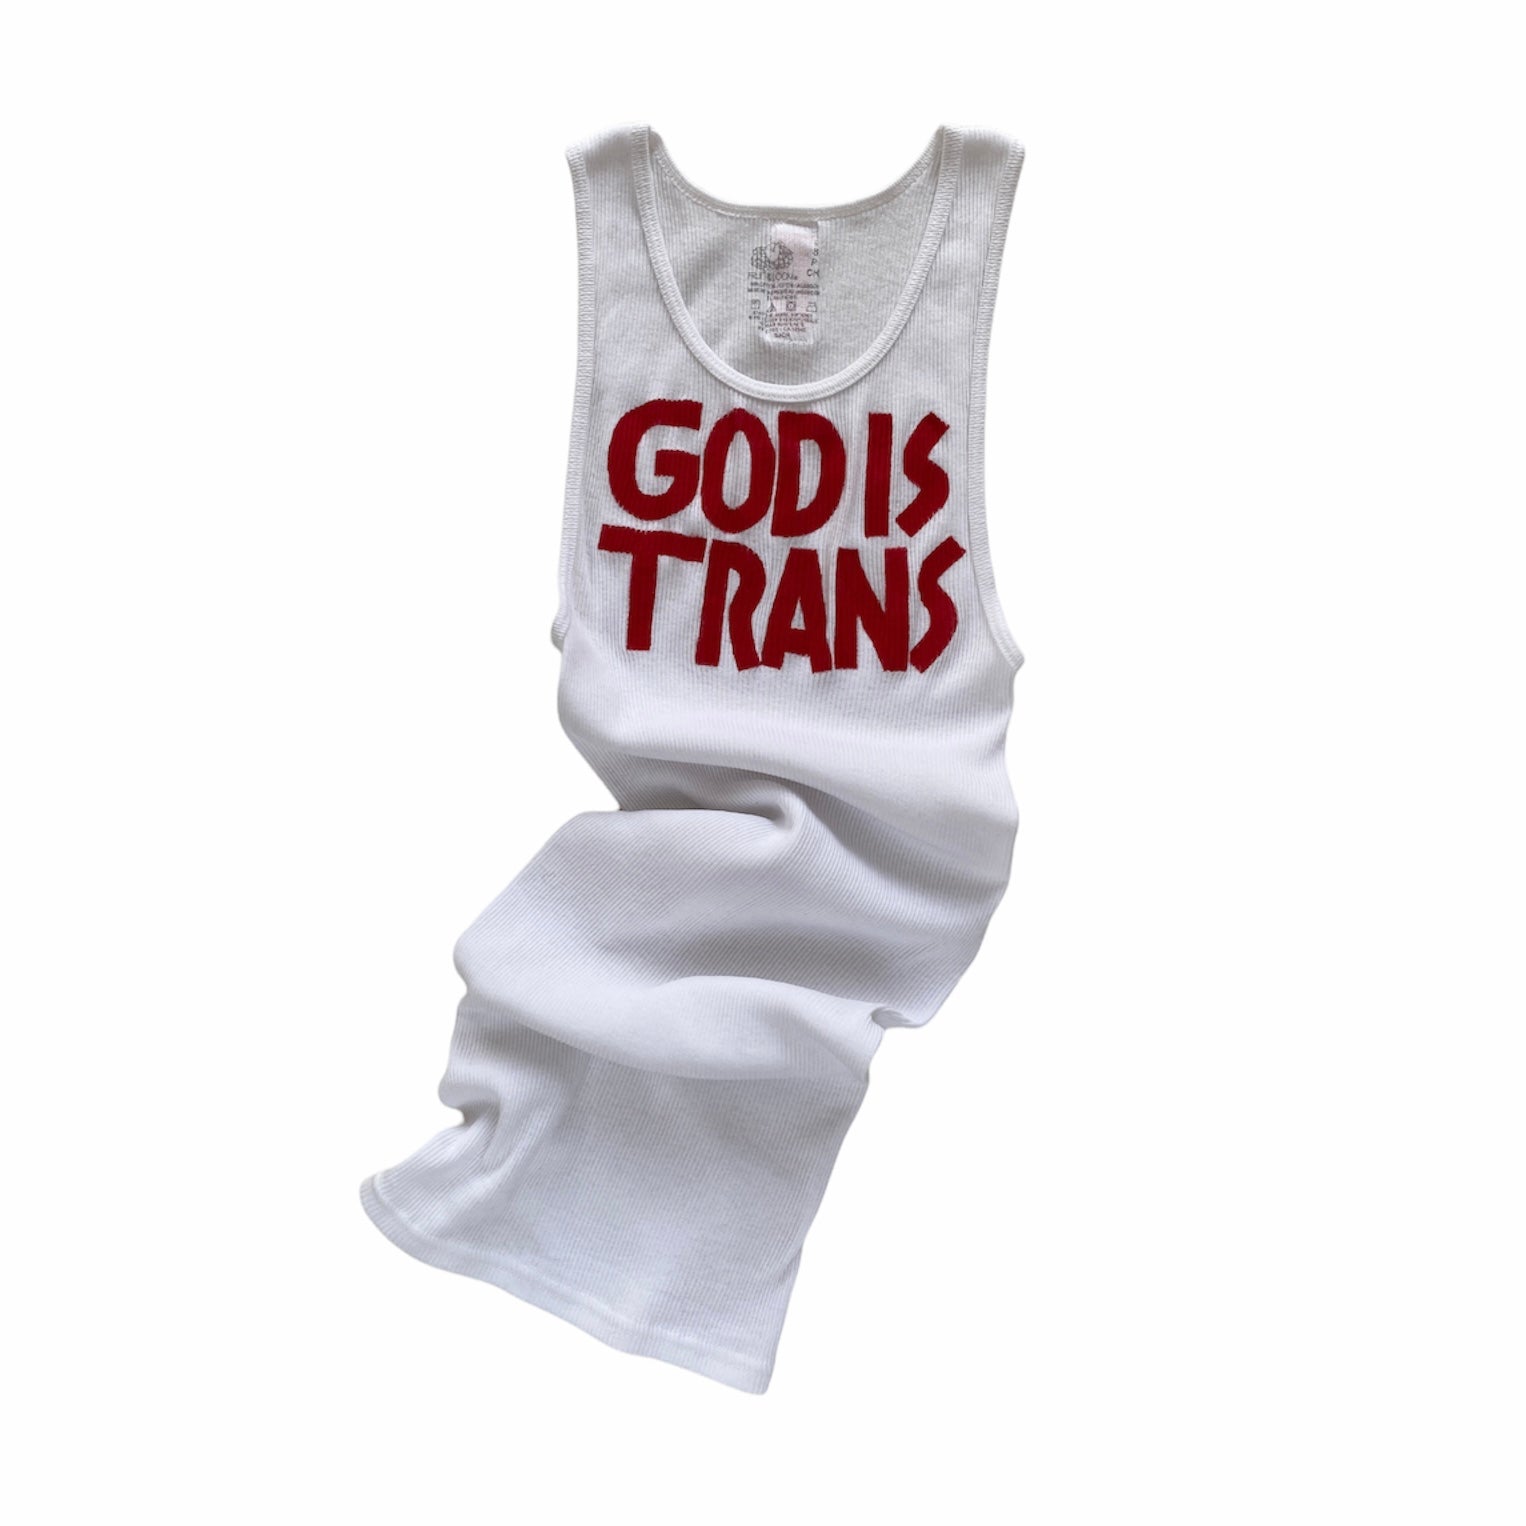 white ribbed A-shirt tank top with hand painted text reading GOD IS TRANS in red across the chest